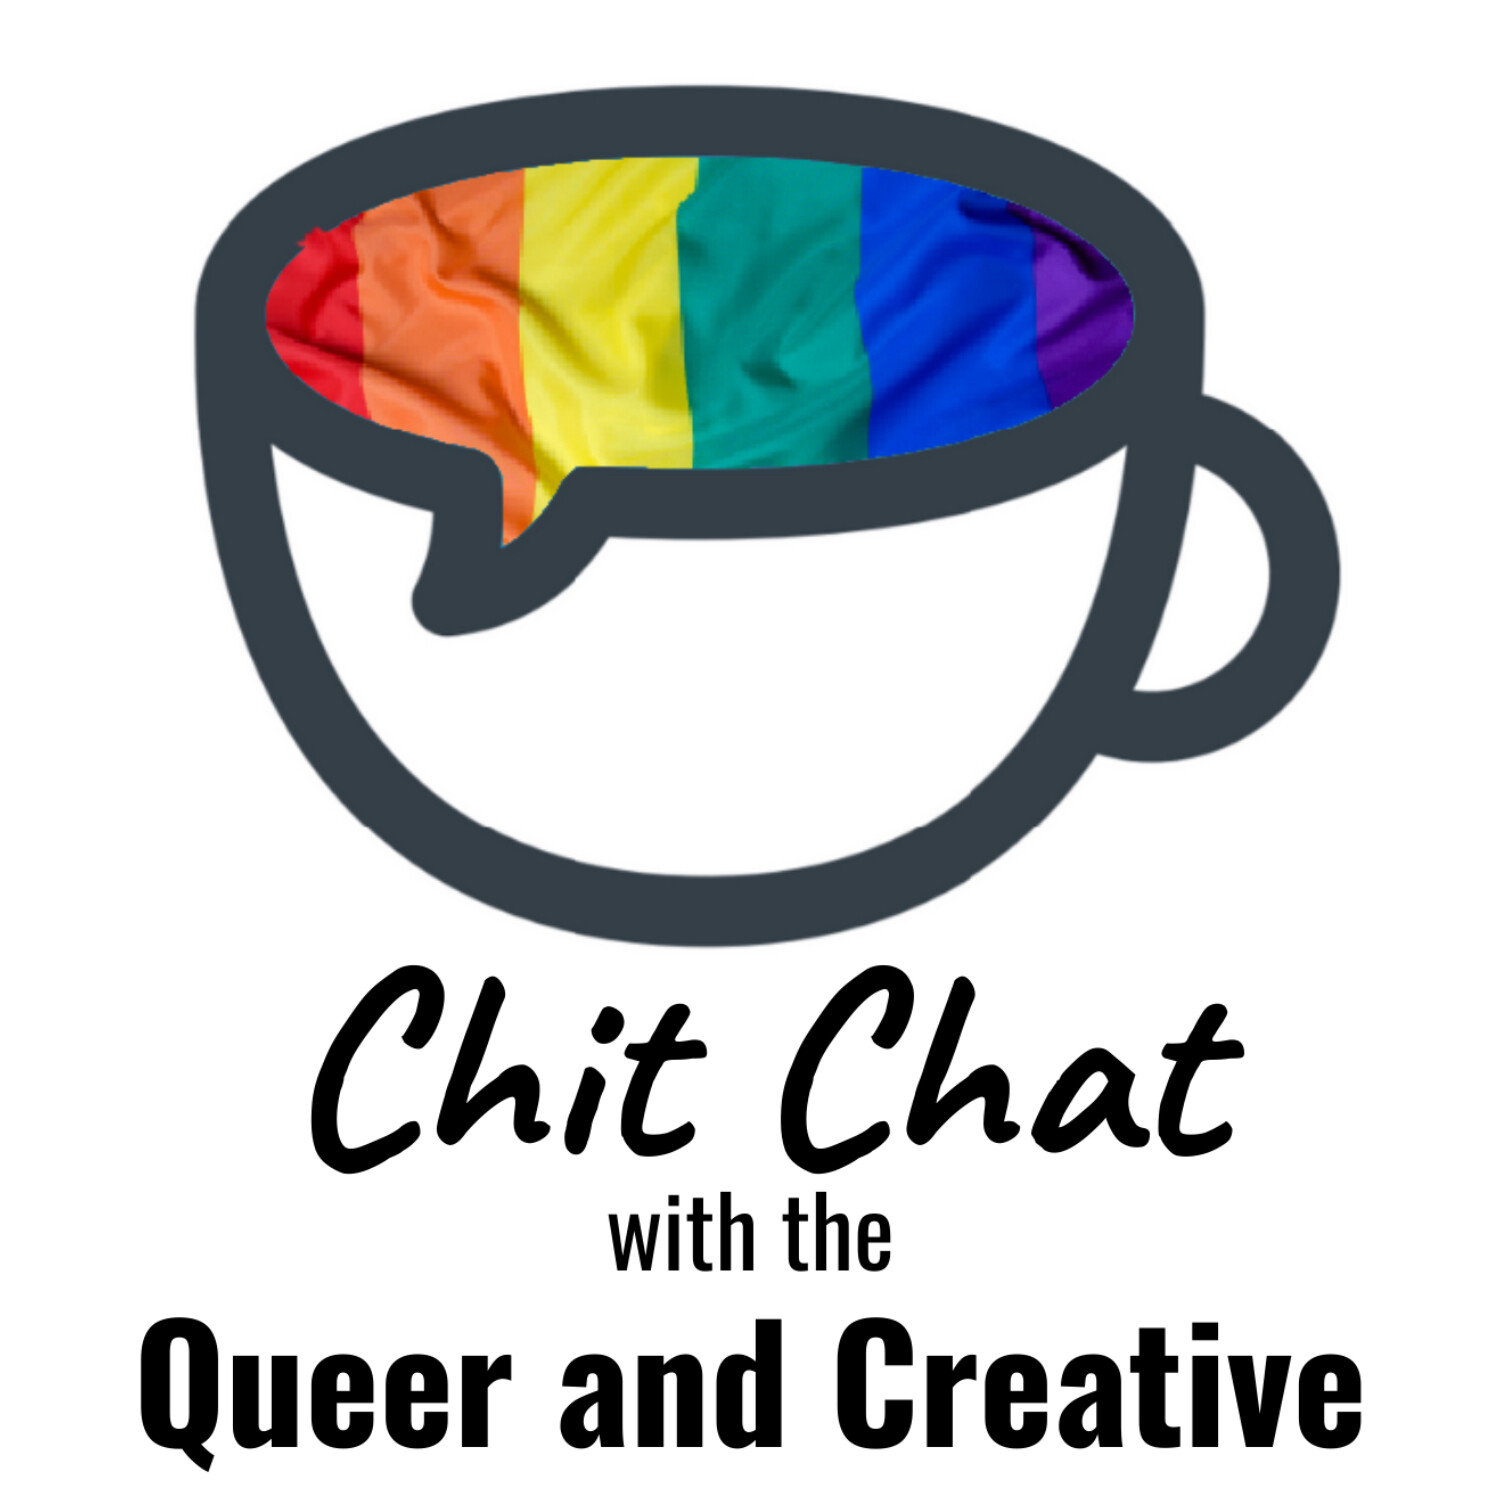 Chit Chat with the Queer and Creative